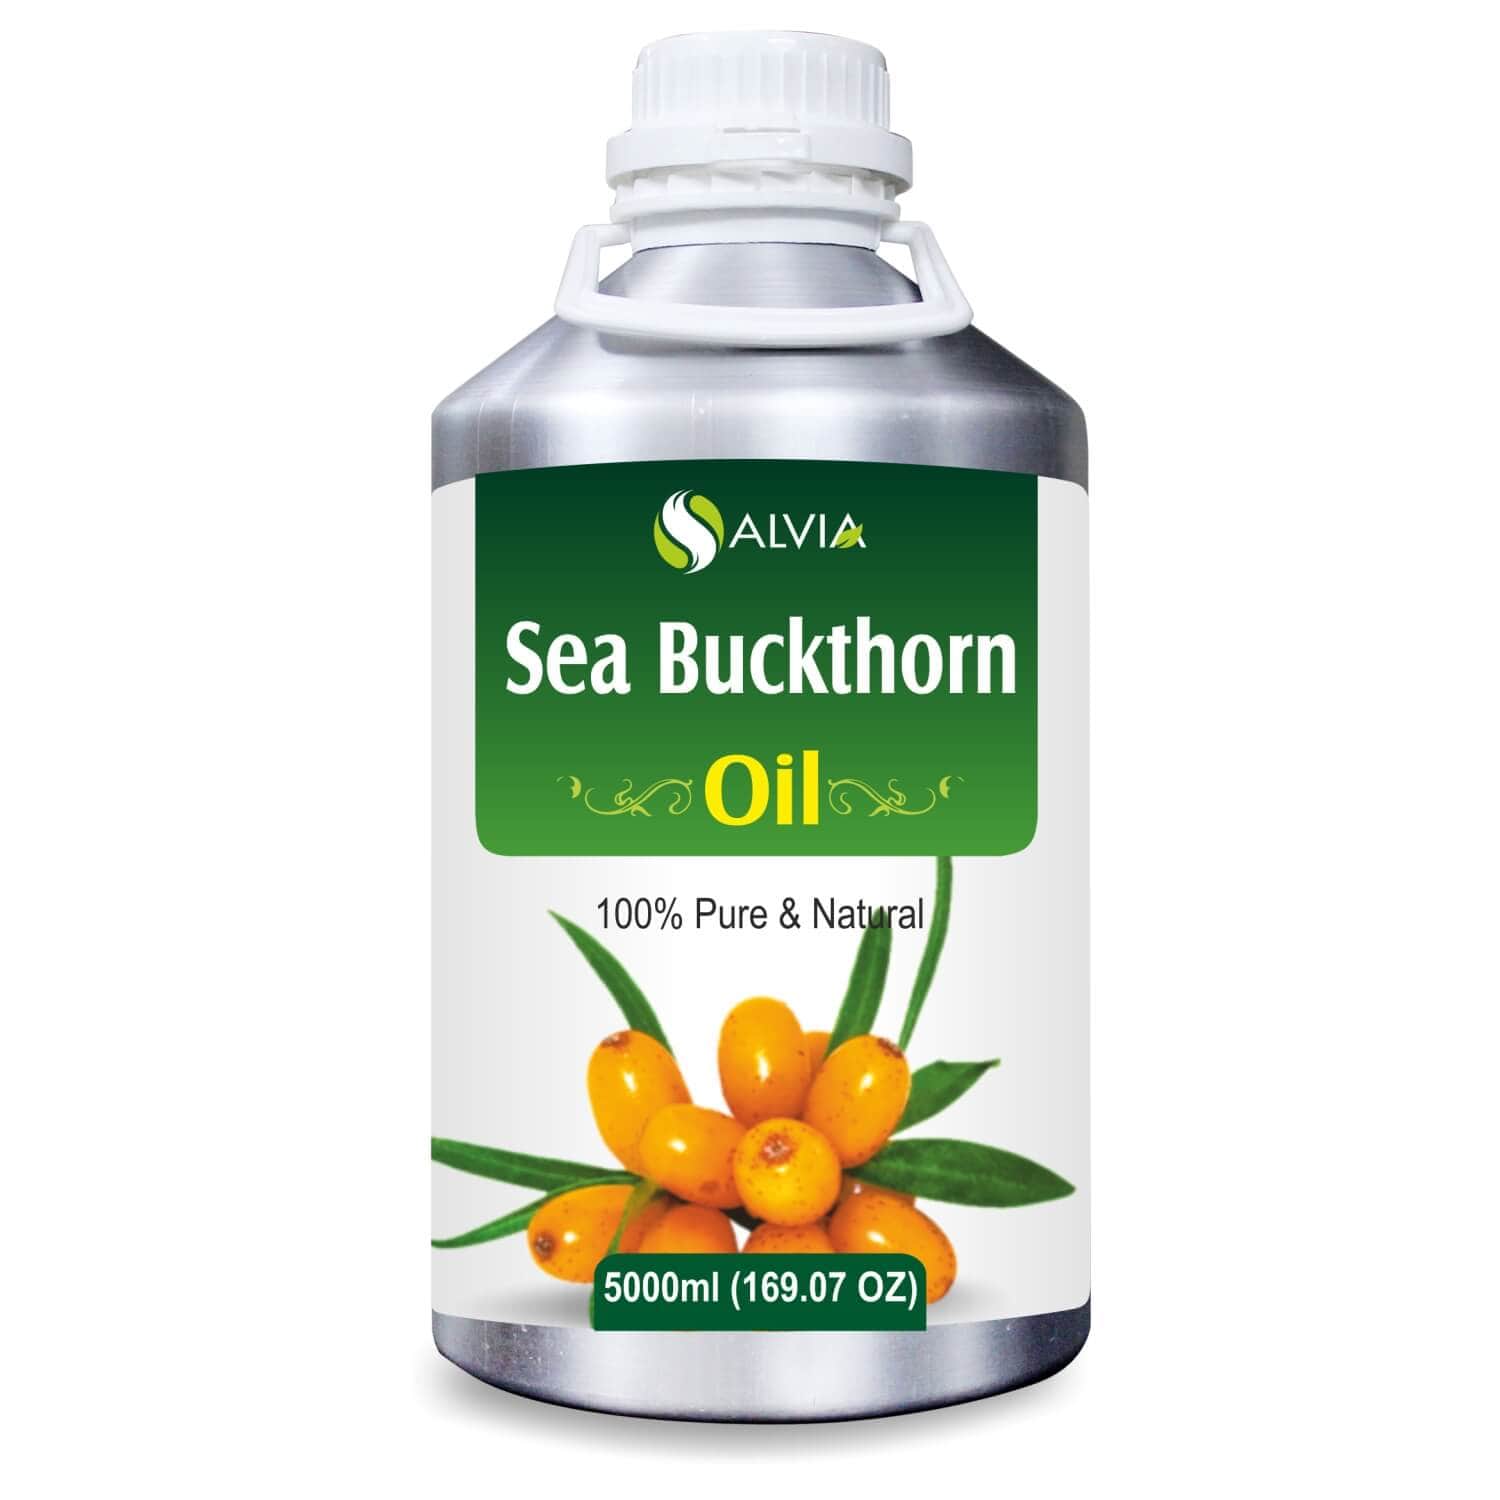 Salvia Natural Carrier Oils 5000ml Sea Buckthorn (Hippophae Rhamnoides) Oil 100% Pure & Natural Carrier Oil Supports Wound Healing, Diminishes Scars, Improves Skin Elasticity